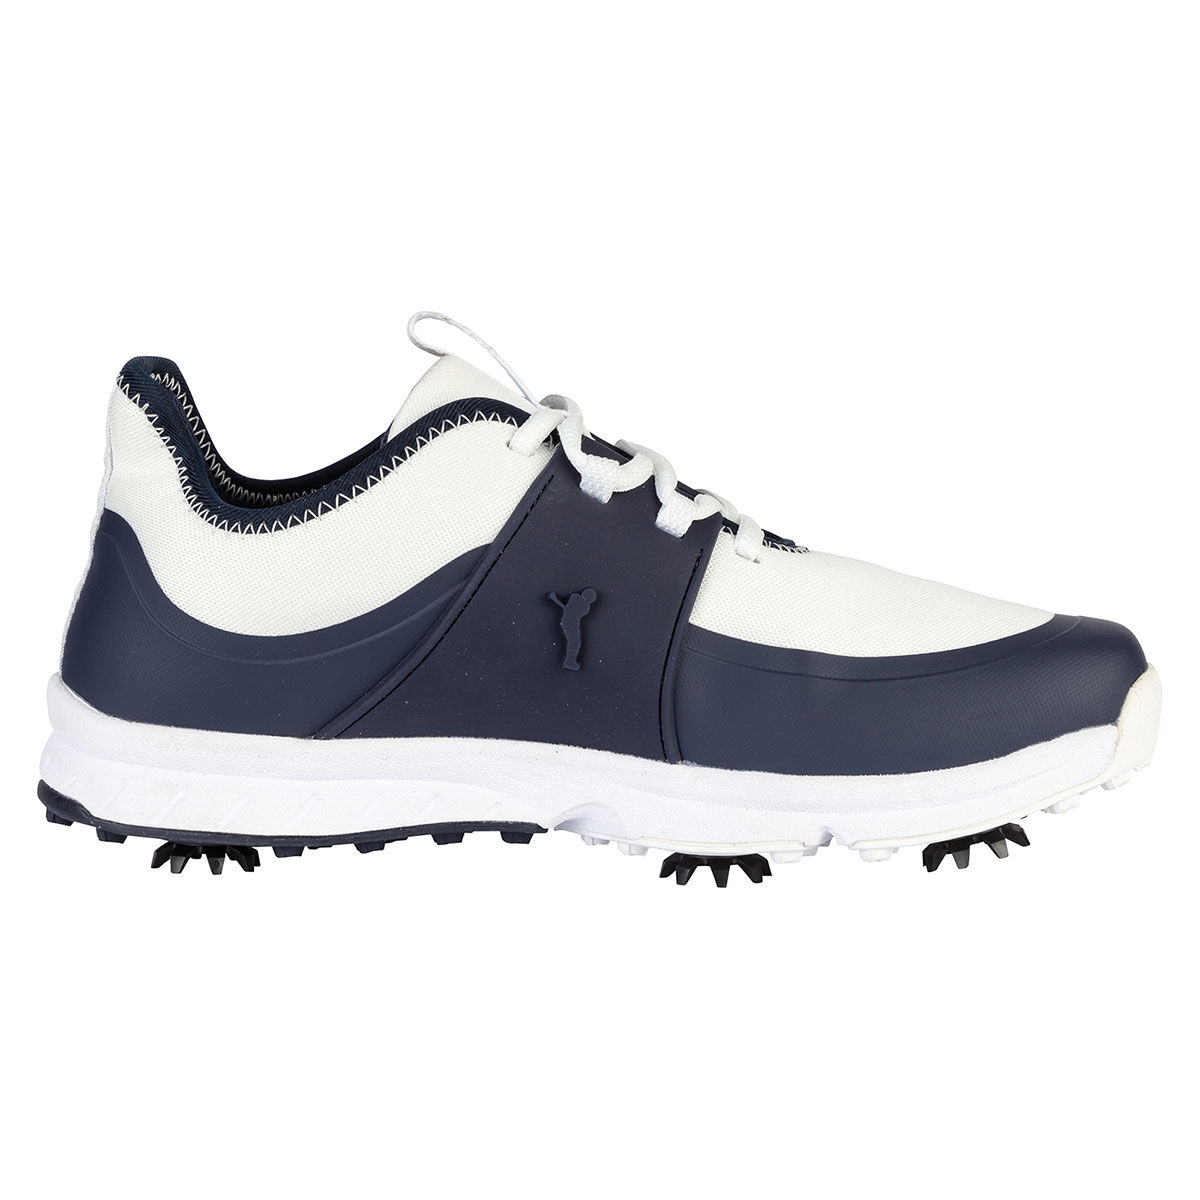 GOLFINO Women’s Navy Blue and White Comfortable Linda Waterproof Spiked Golf Shoes, Size: 4 | American Golf